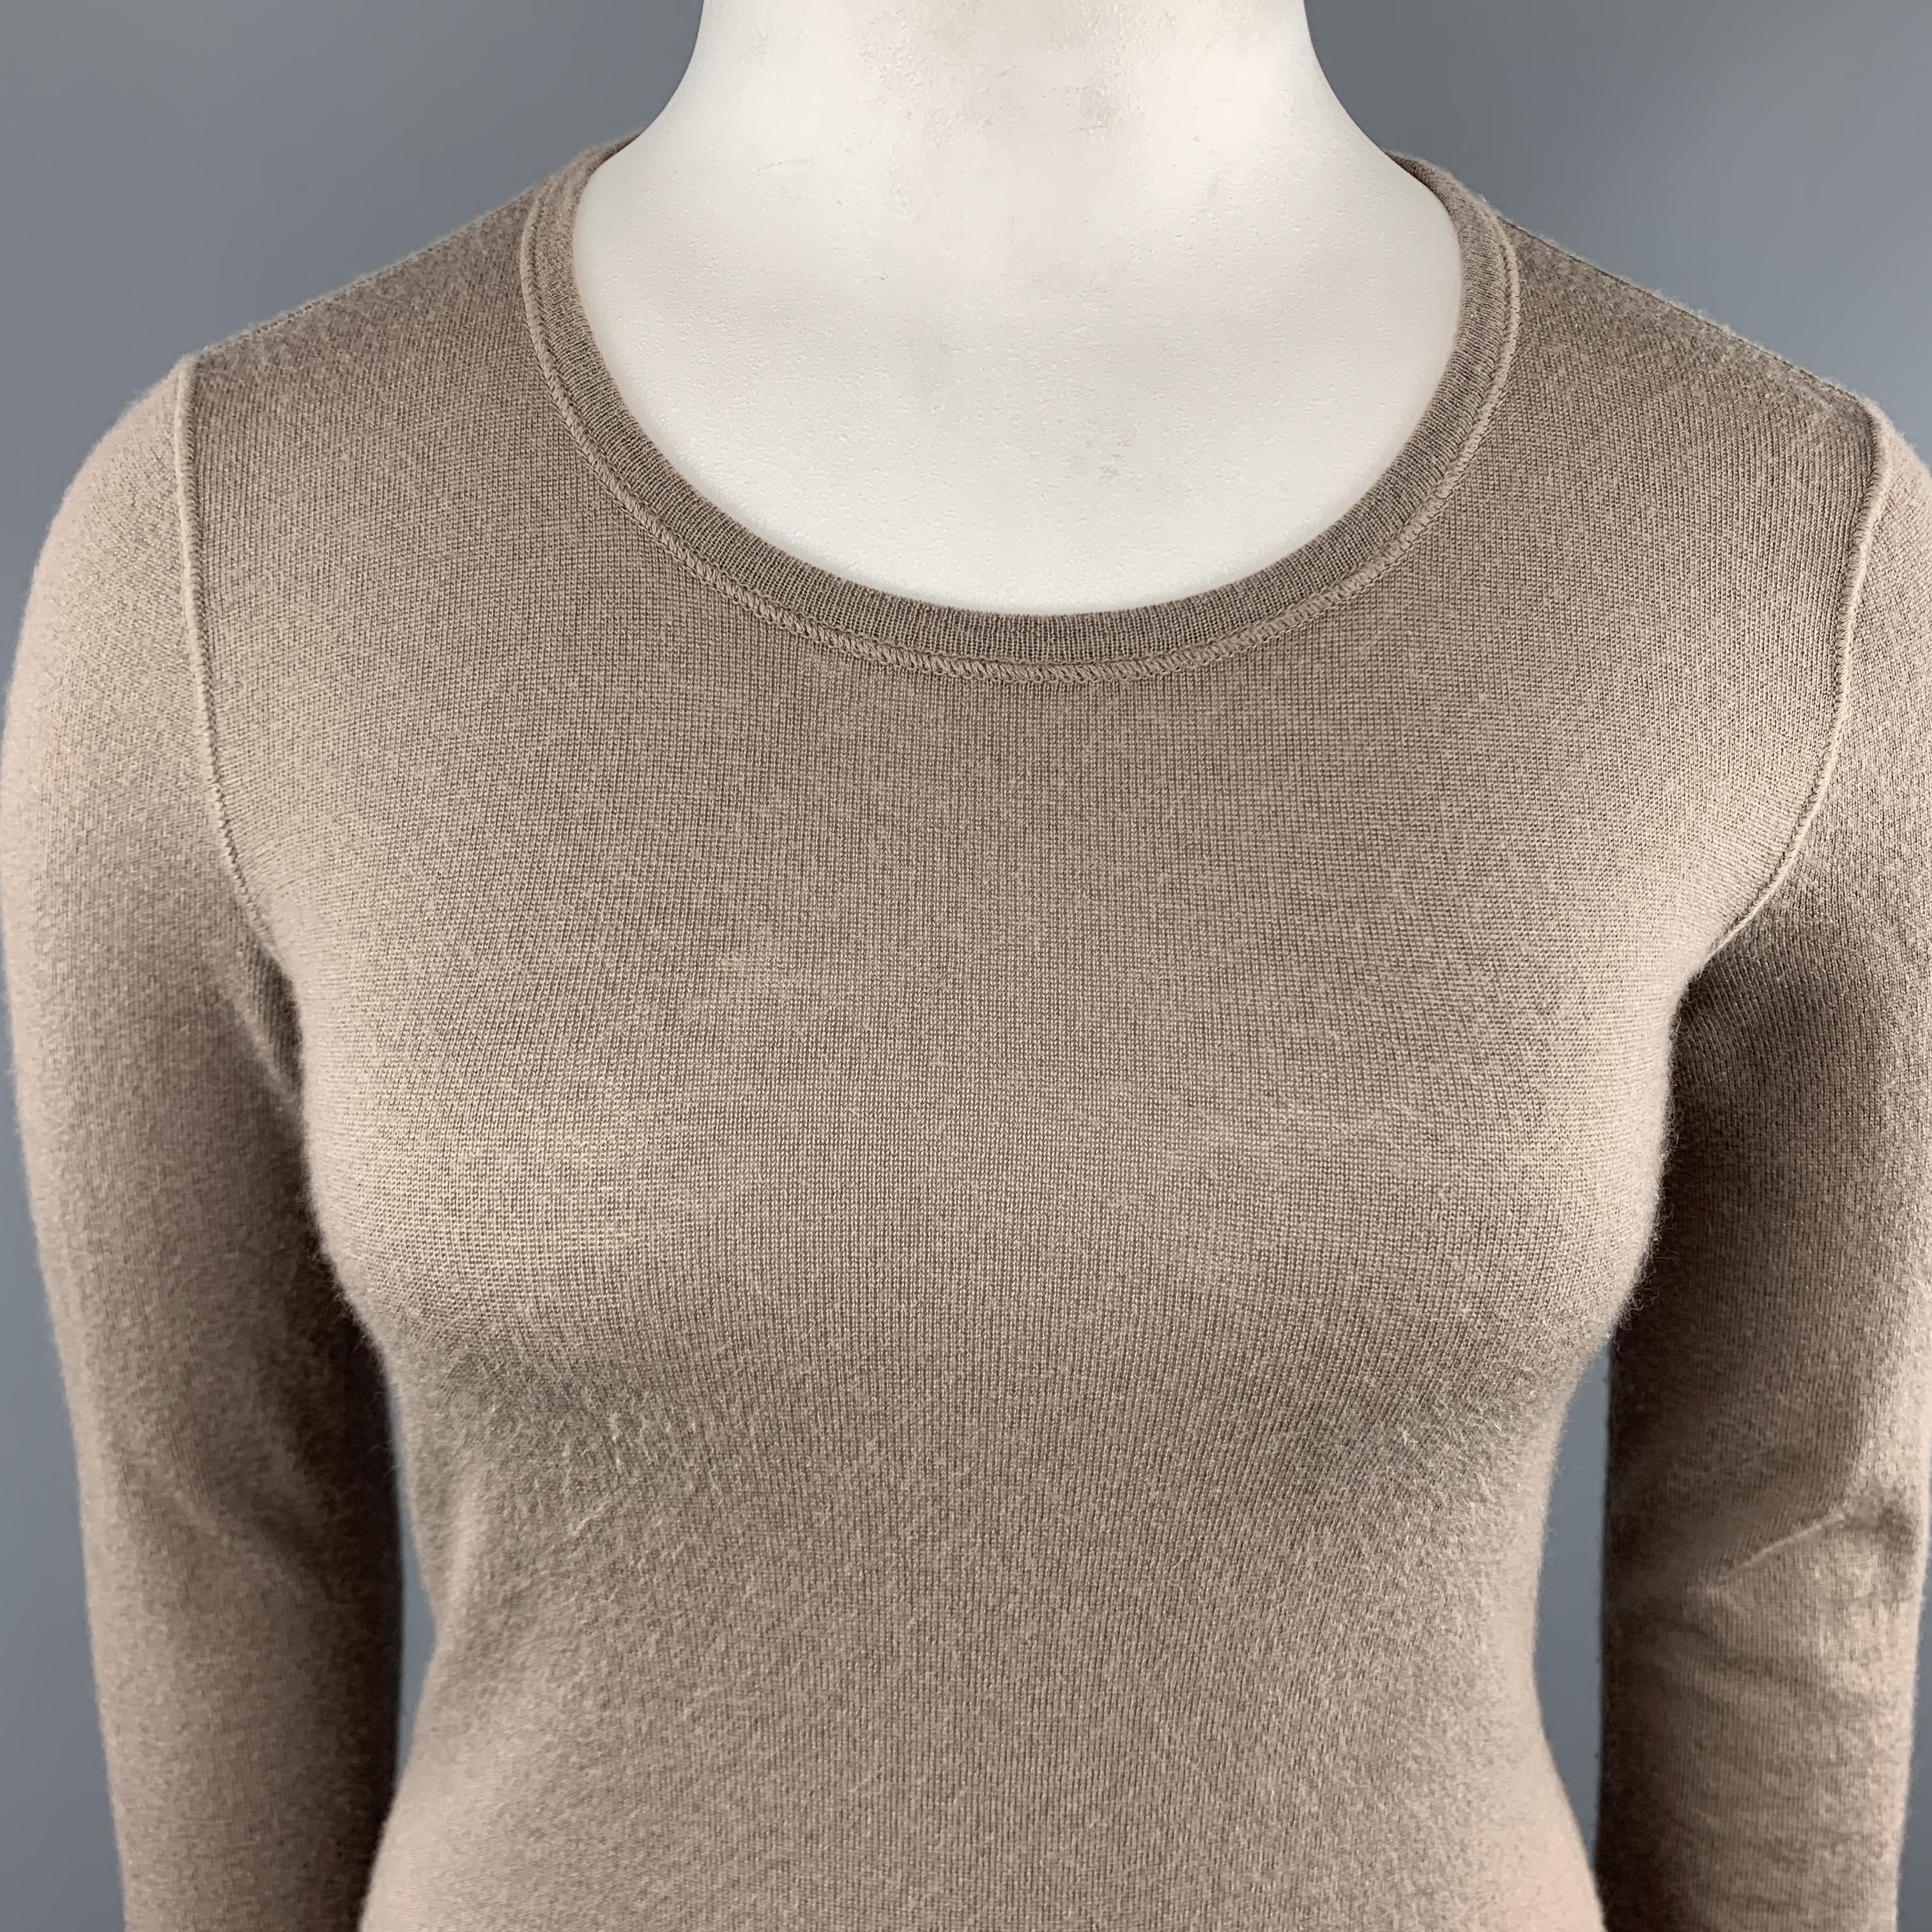 LORO PIANA long sleeve pullover sweater comes in a taupe beige sheer cashmere knit with a round neckline. Made in Italy.
 

Very Good Pre-Owned Condition.
Marked: IT 46

Measurements:

Shoulder: 15 in.
Bust: 38 in.
Sleeve: 26 in.
Length: 27.5 in.